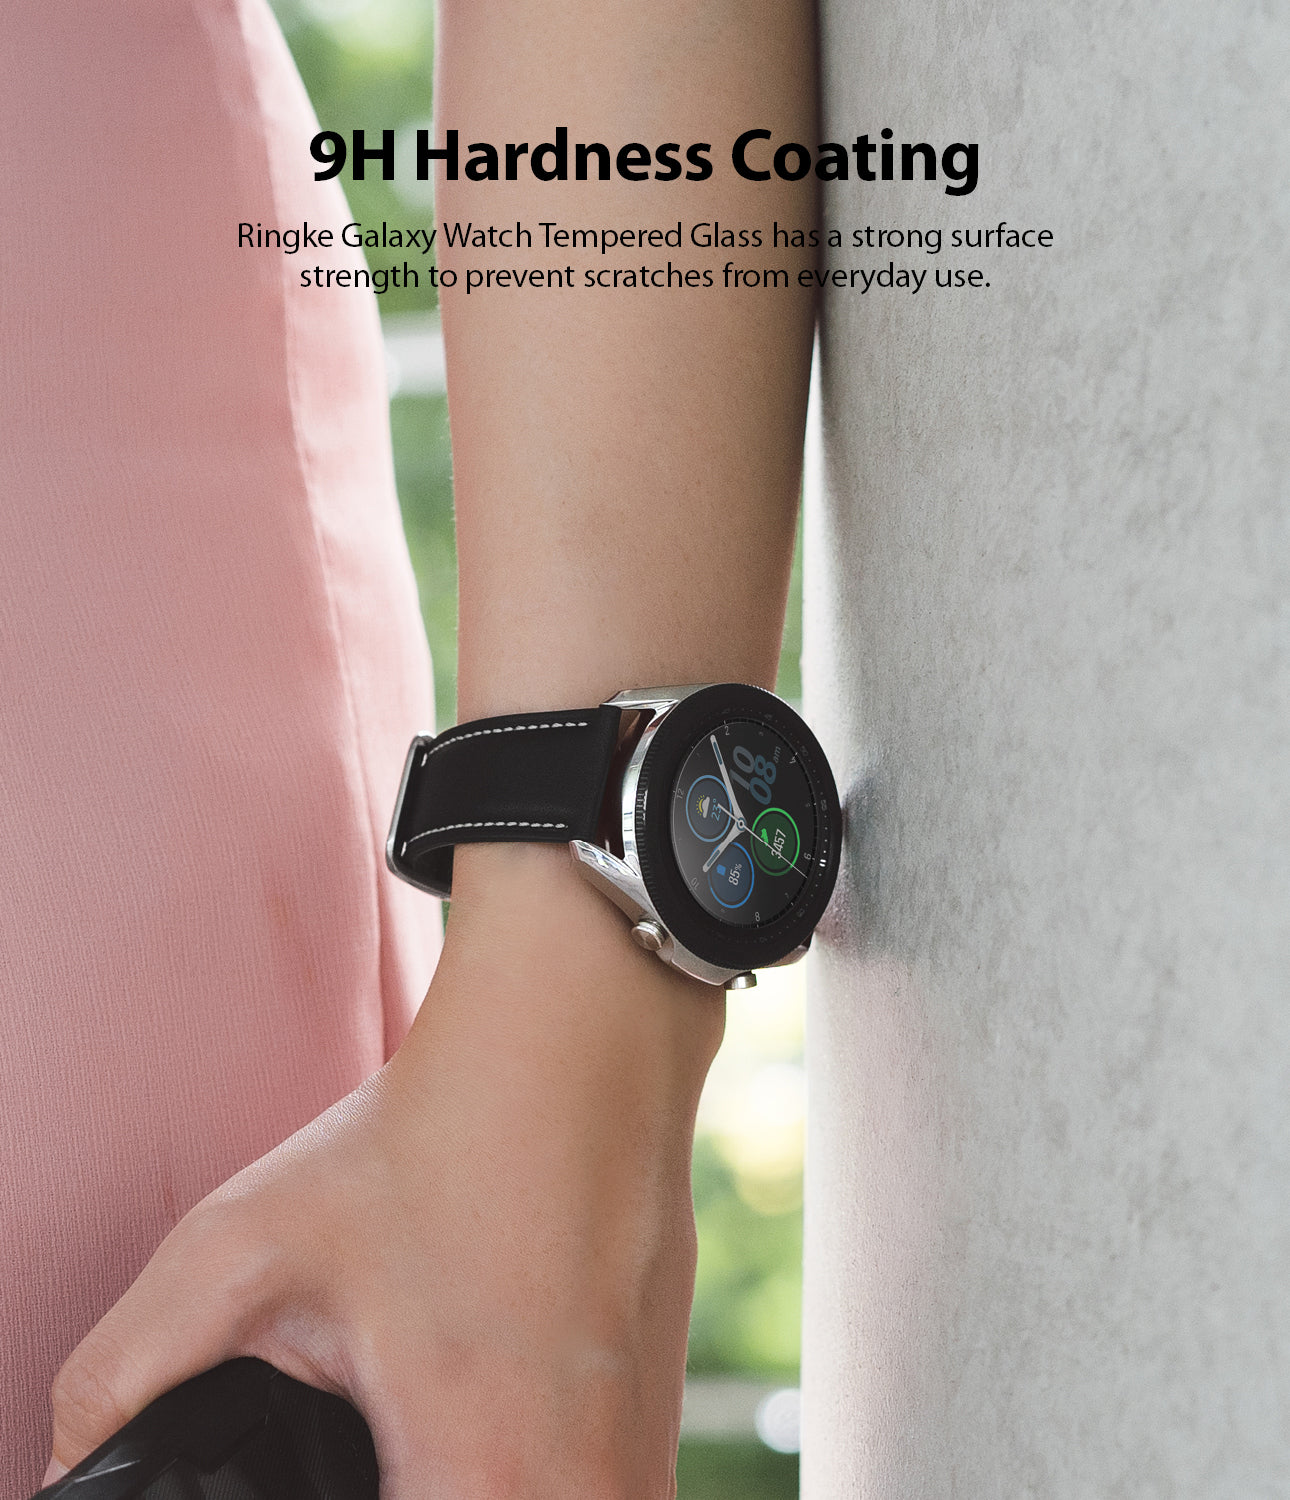 9h hardness coating - strong surface strength to prevent scratches from everyday use